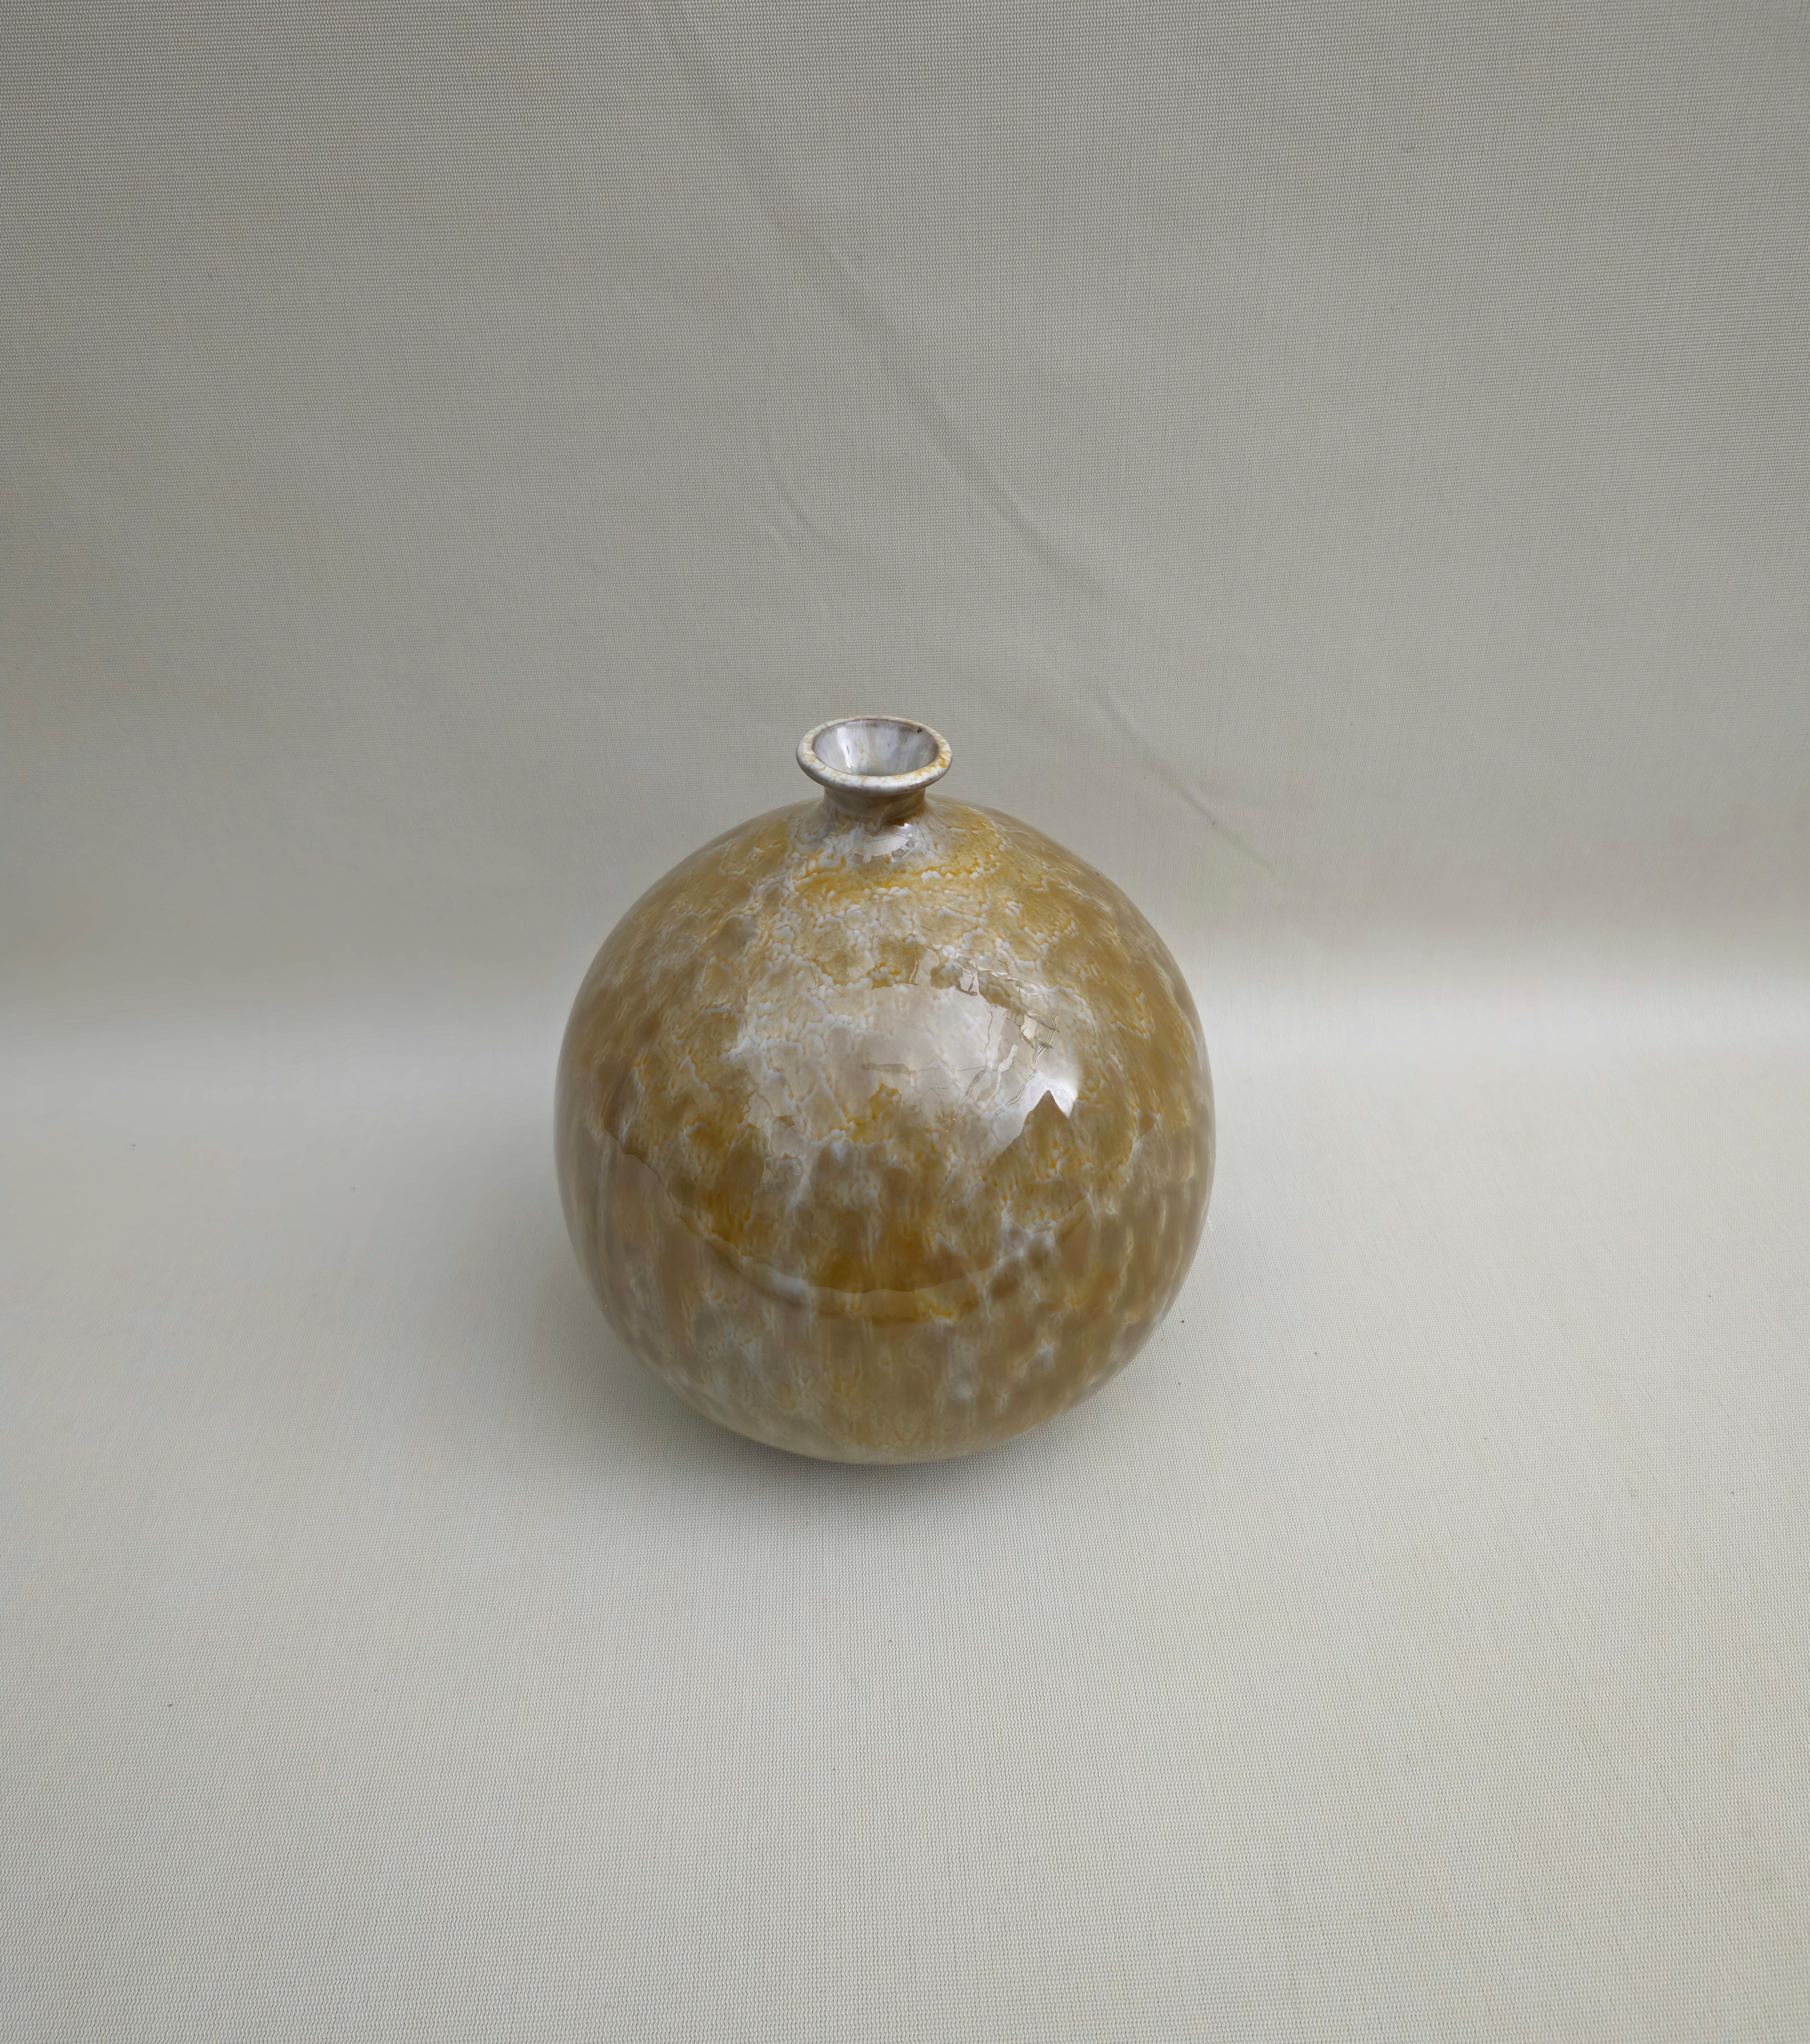 Vase Decorative Object Ceramic Enamelled Midcentury Modern Italian Design 1960s In Good Condition For Sale In Palermo, IT